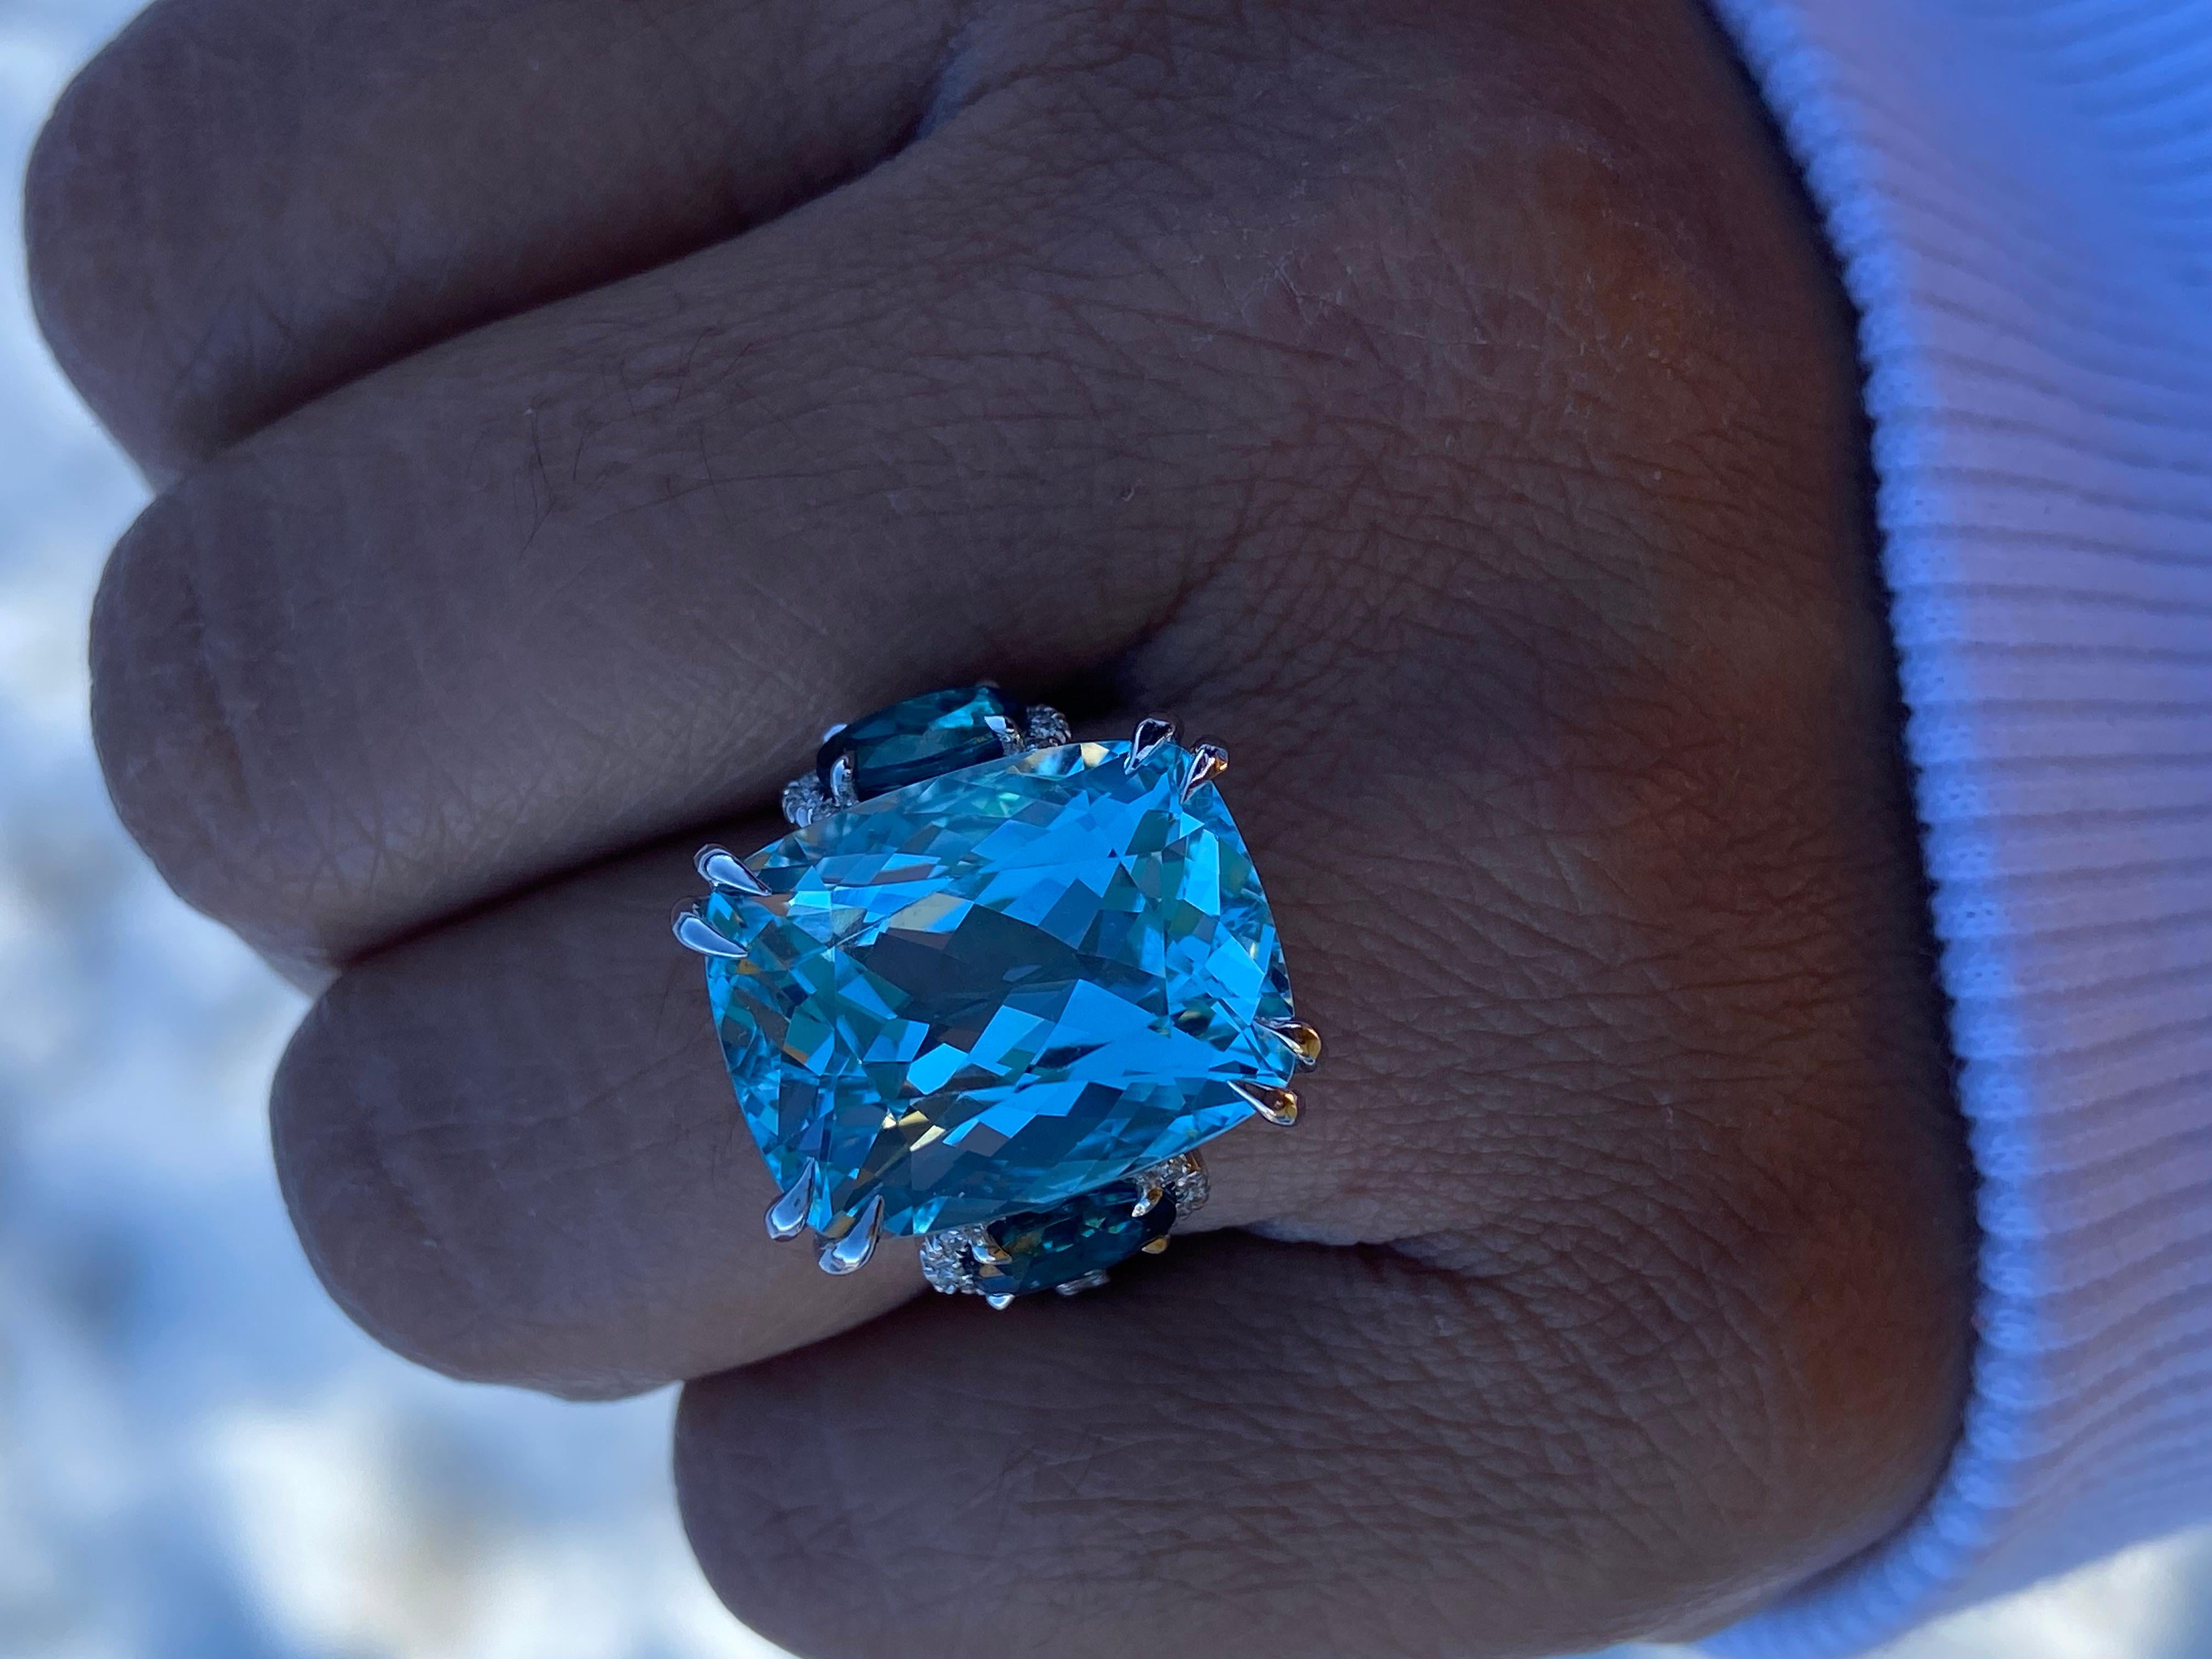 A 15.23ct Aquamarine is joined by two Indigo Tourmalines totaling 1.88 carats and numerous round diamonds. Crafted in 18K white gold ring. GIA certified.